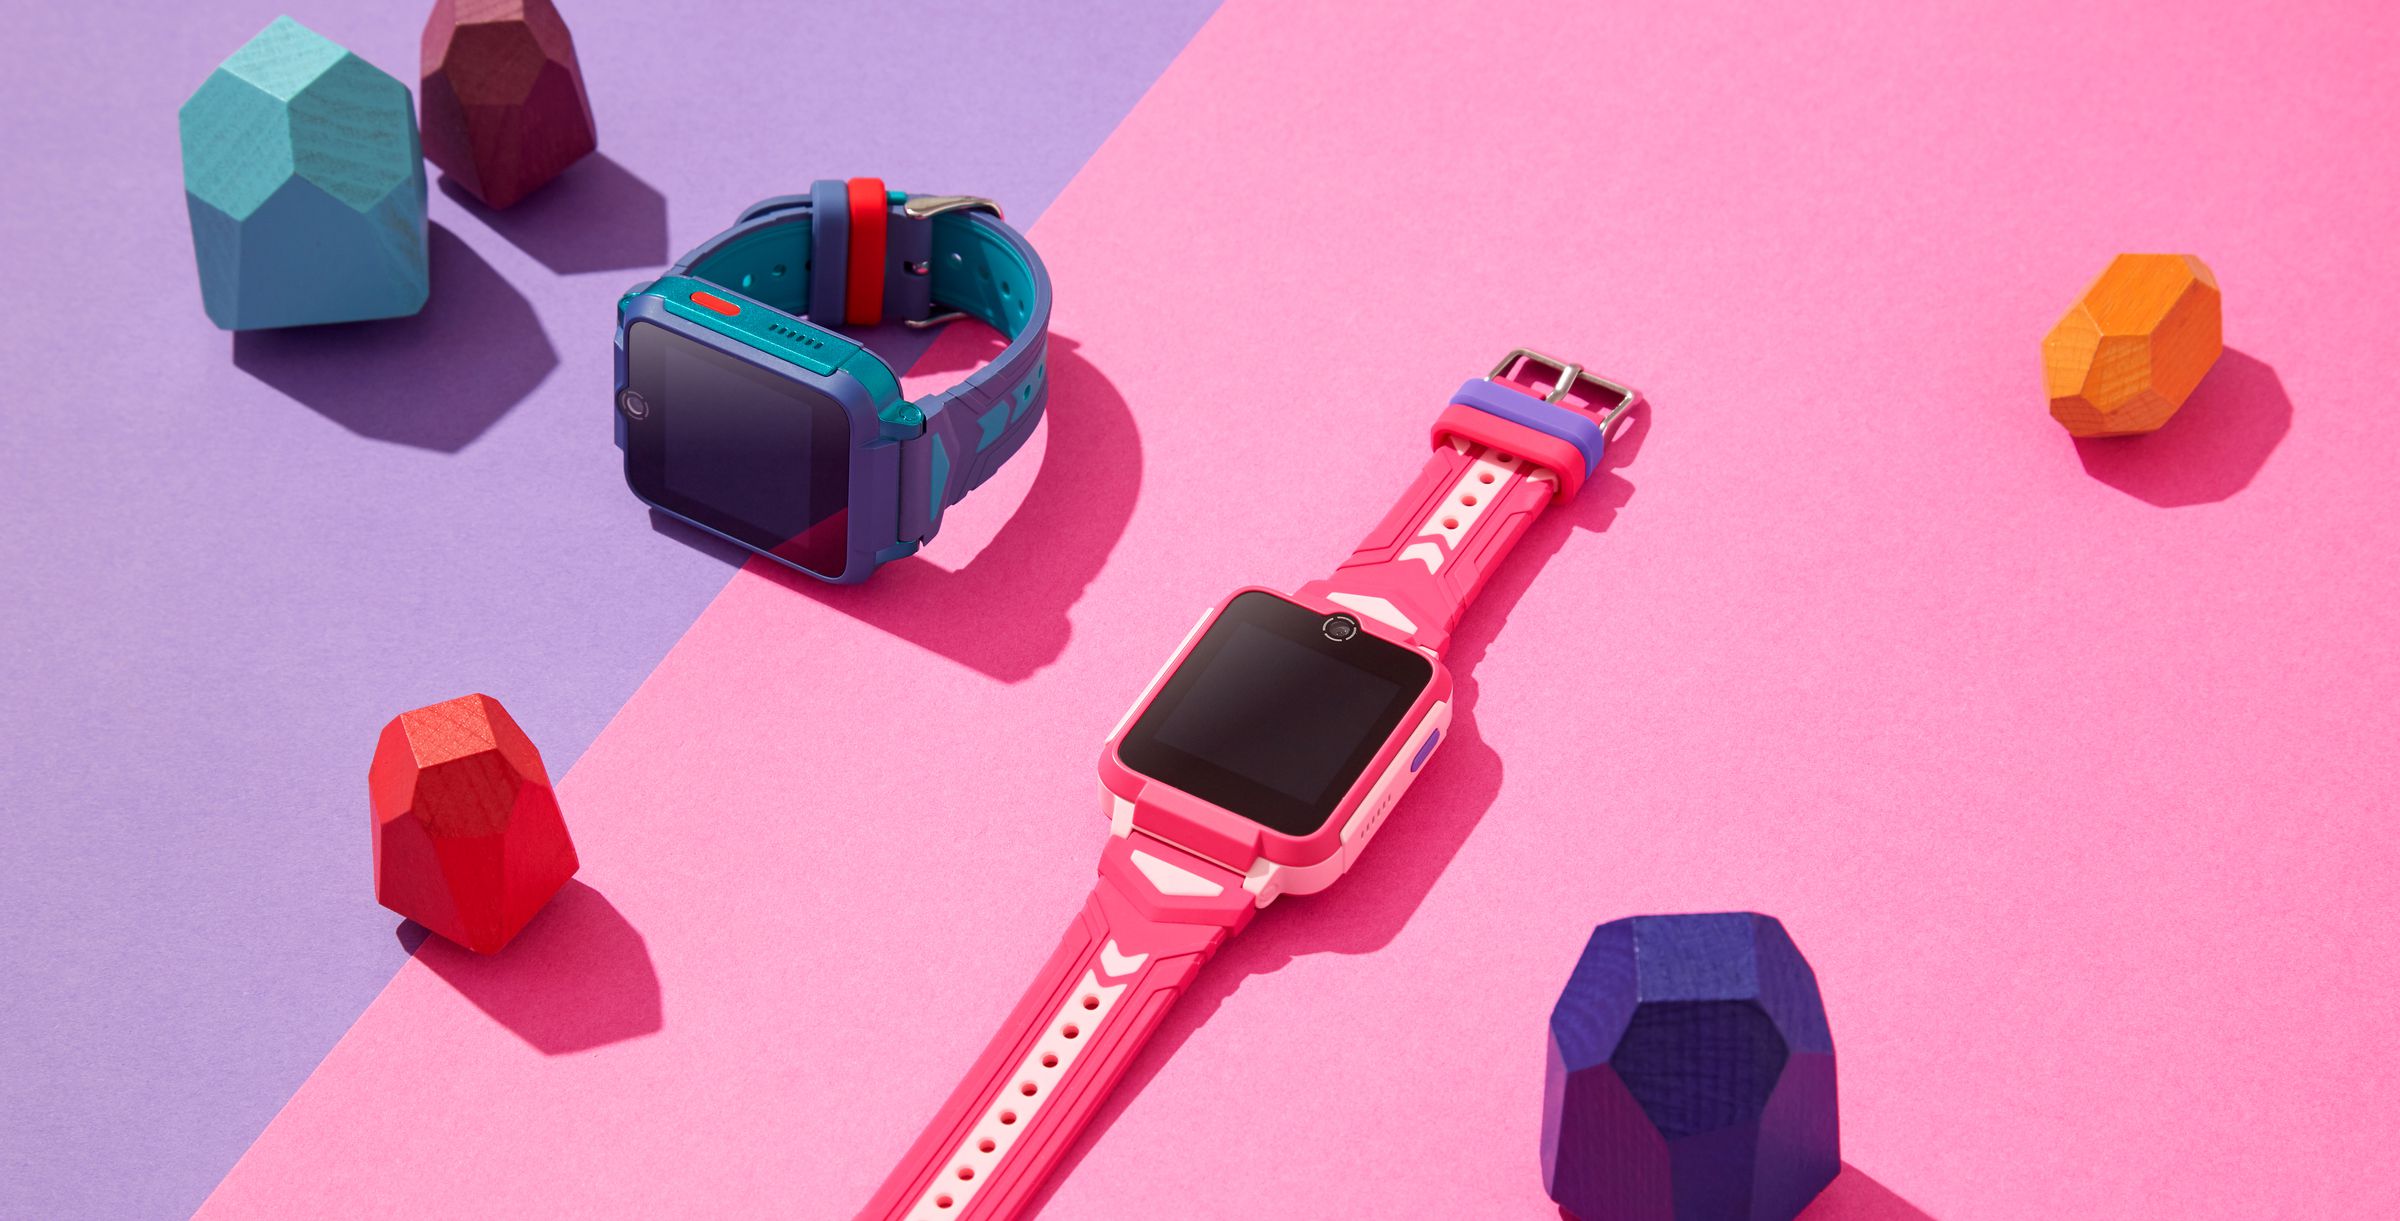 The Movetime Family Watch 2 is designed for school-aged kids who aren’t quite ready for a smartphone.